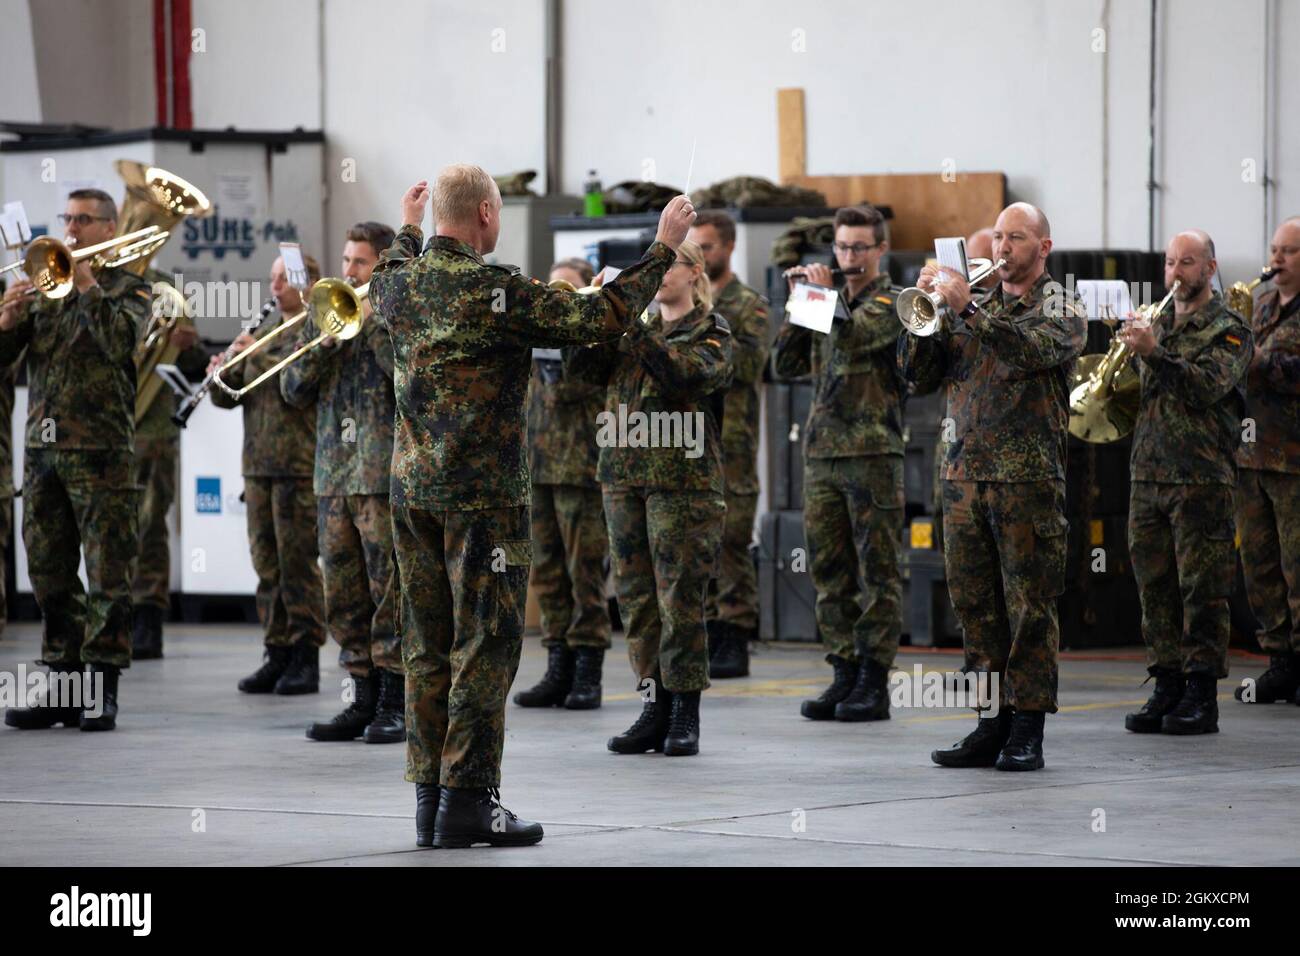 German Army soldiers, assigned to the Heeresmusikkorps Veitshöchheim, play the Army Song during a U.S. Army 1st Combat Aviation Brigade change of command ceremony at Illesheim Army Airfield, Germany, July 17, 2021. The 1st CAB is deployed to Europe in support of Atlantic Resolve, which maintains a rotational presence throughout Europe with U.S. forces living and training alongside allies daily, strengthening interoperability, improving communication, and enhancing the ability to anticipate, react, move and communicate as a cohesive team. Stock Photo